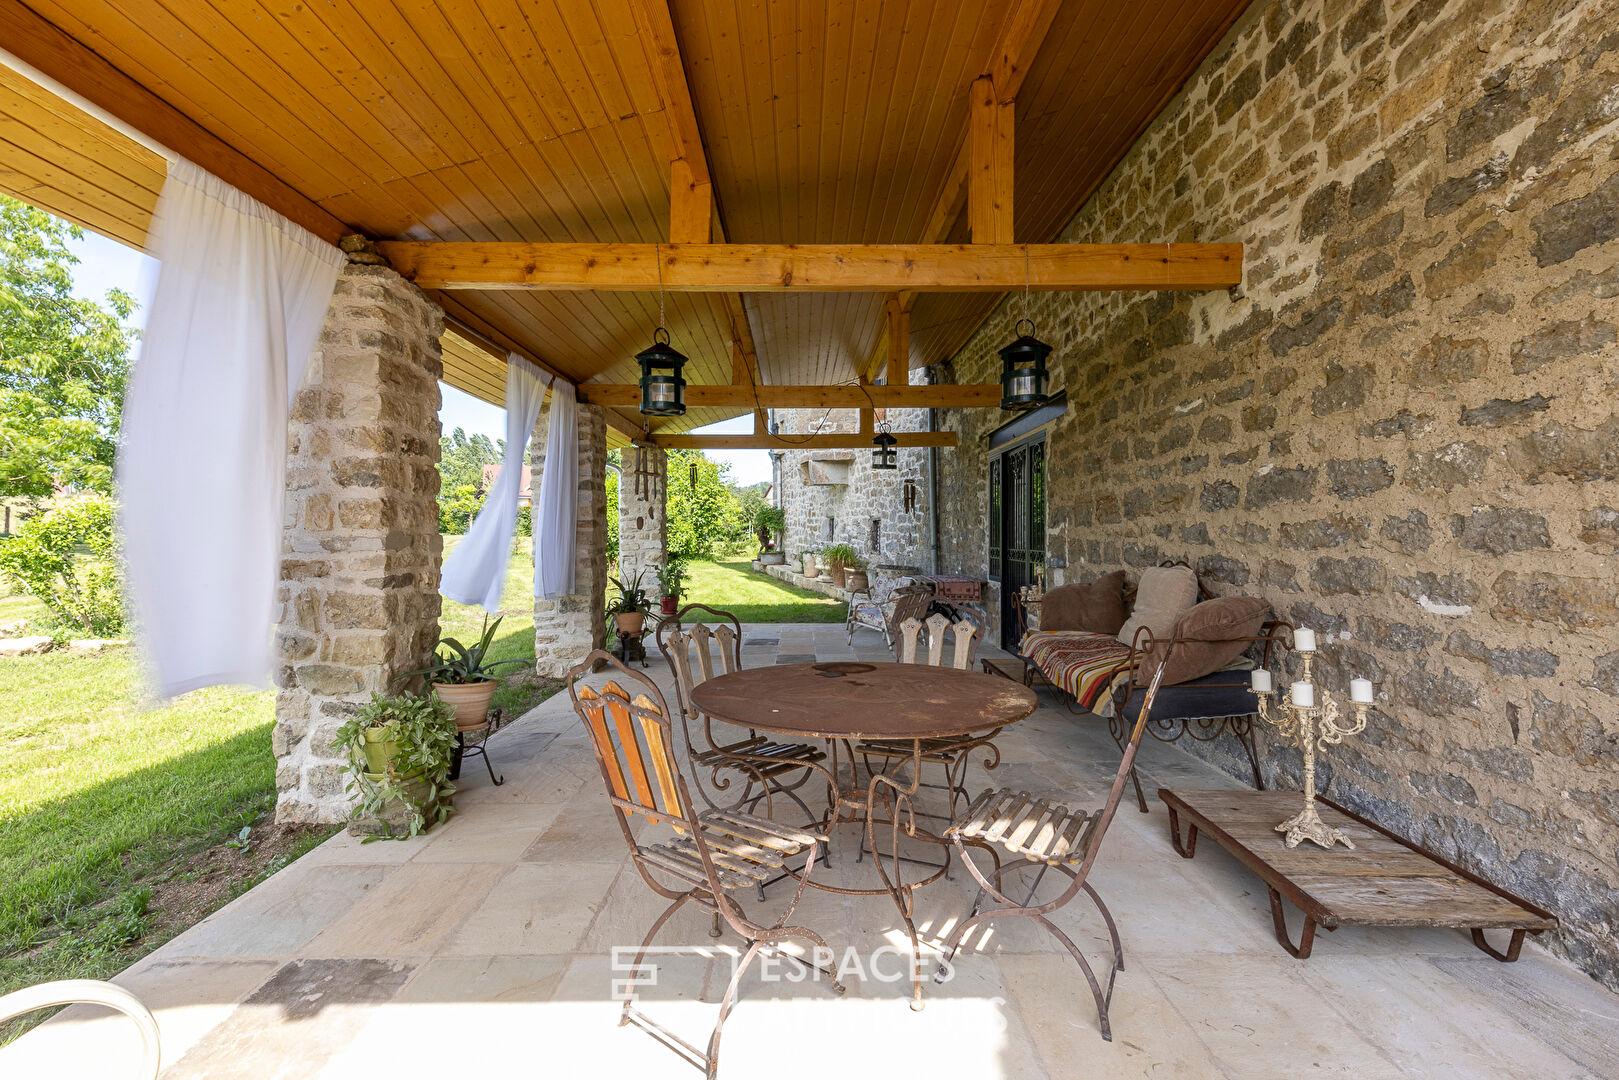 Renovated stone house combining charm and modern comfort